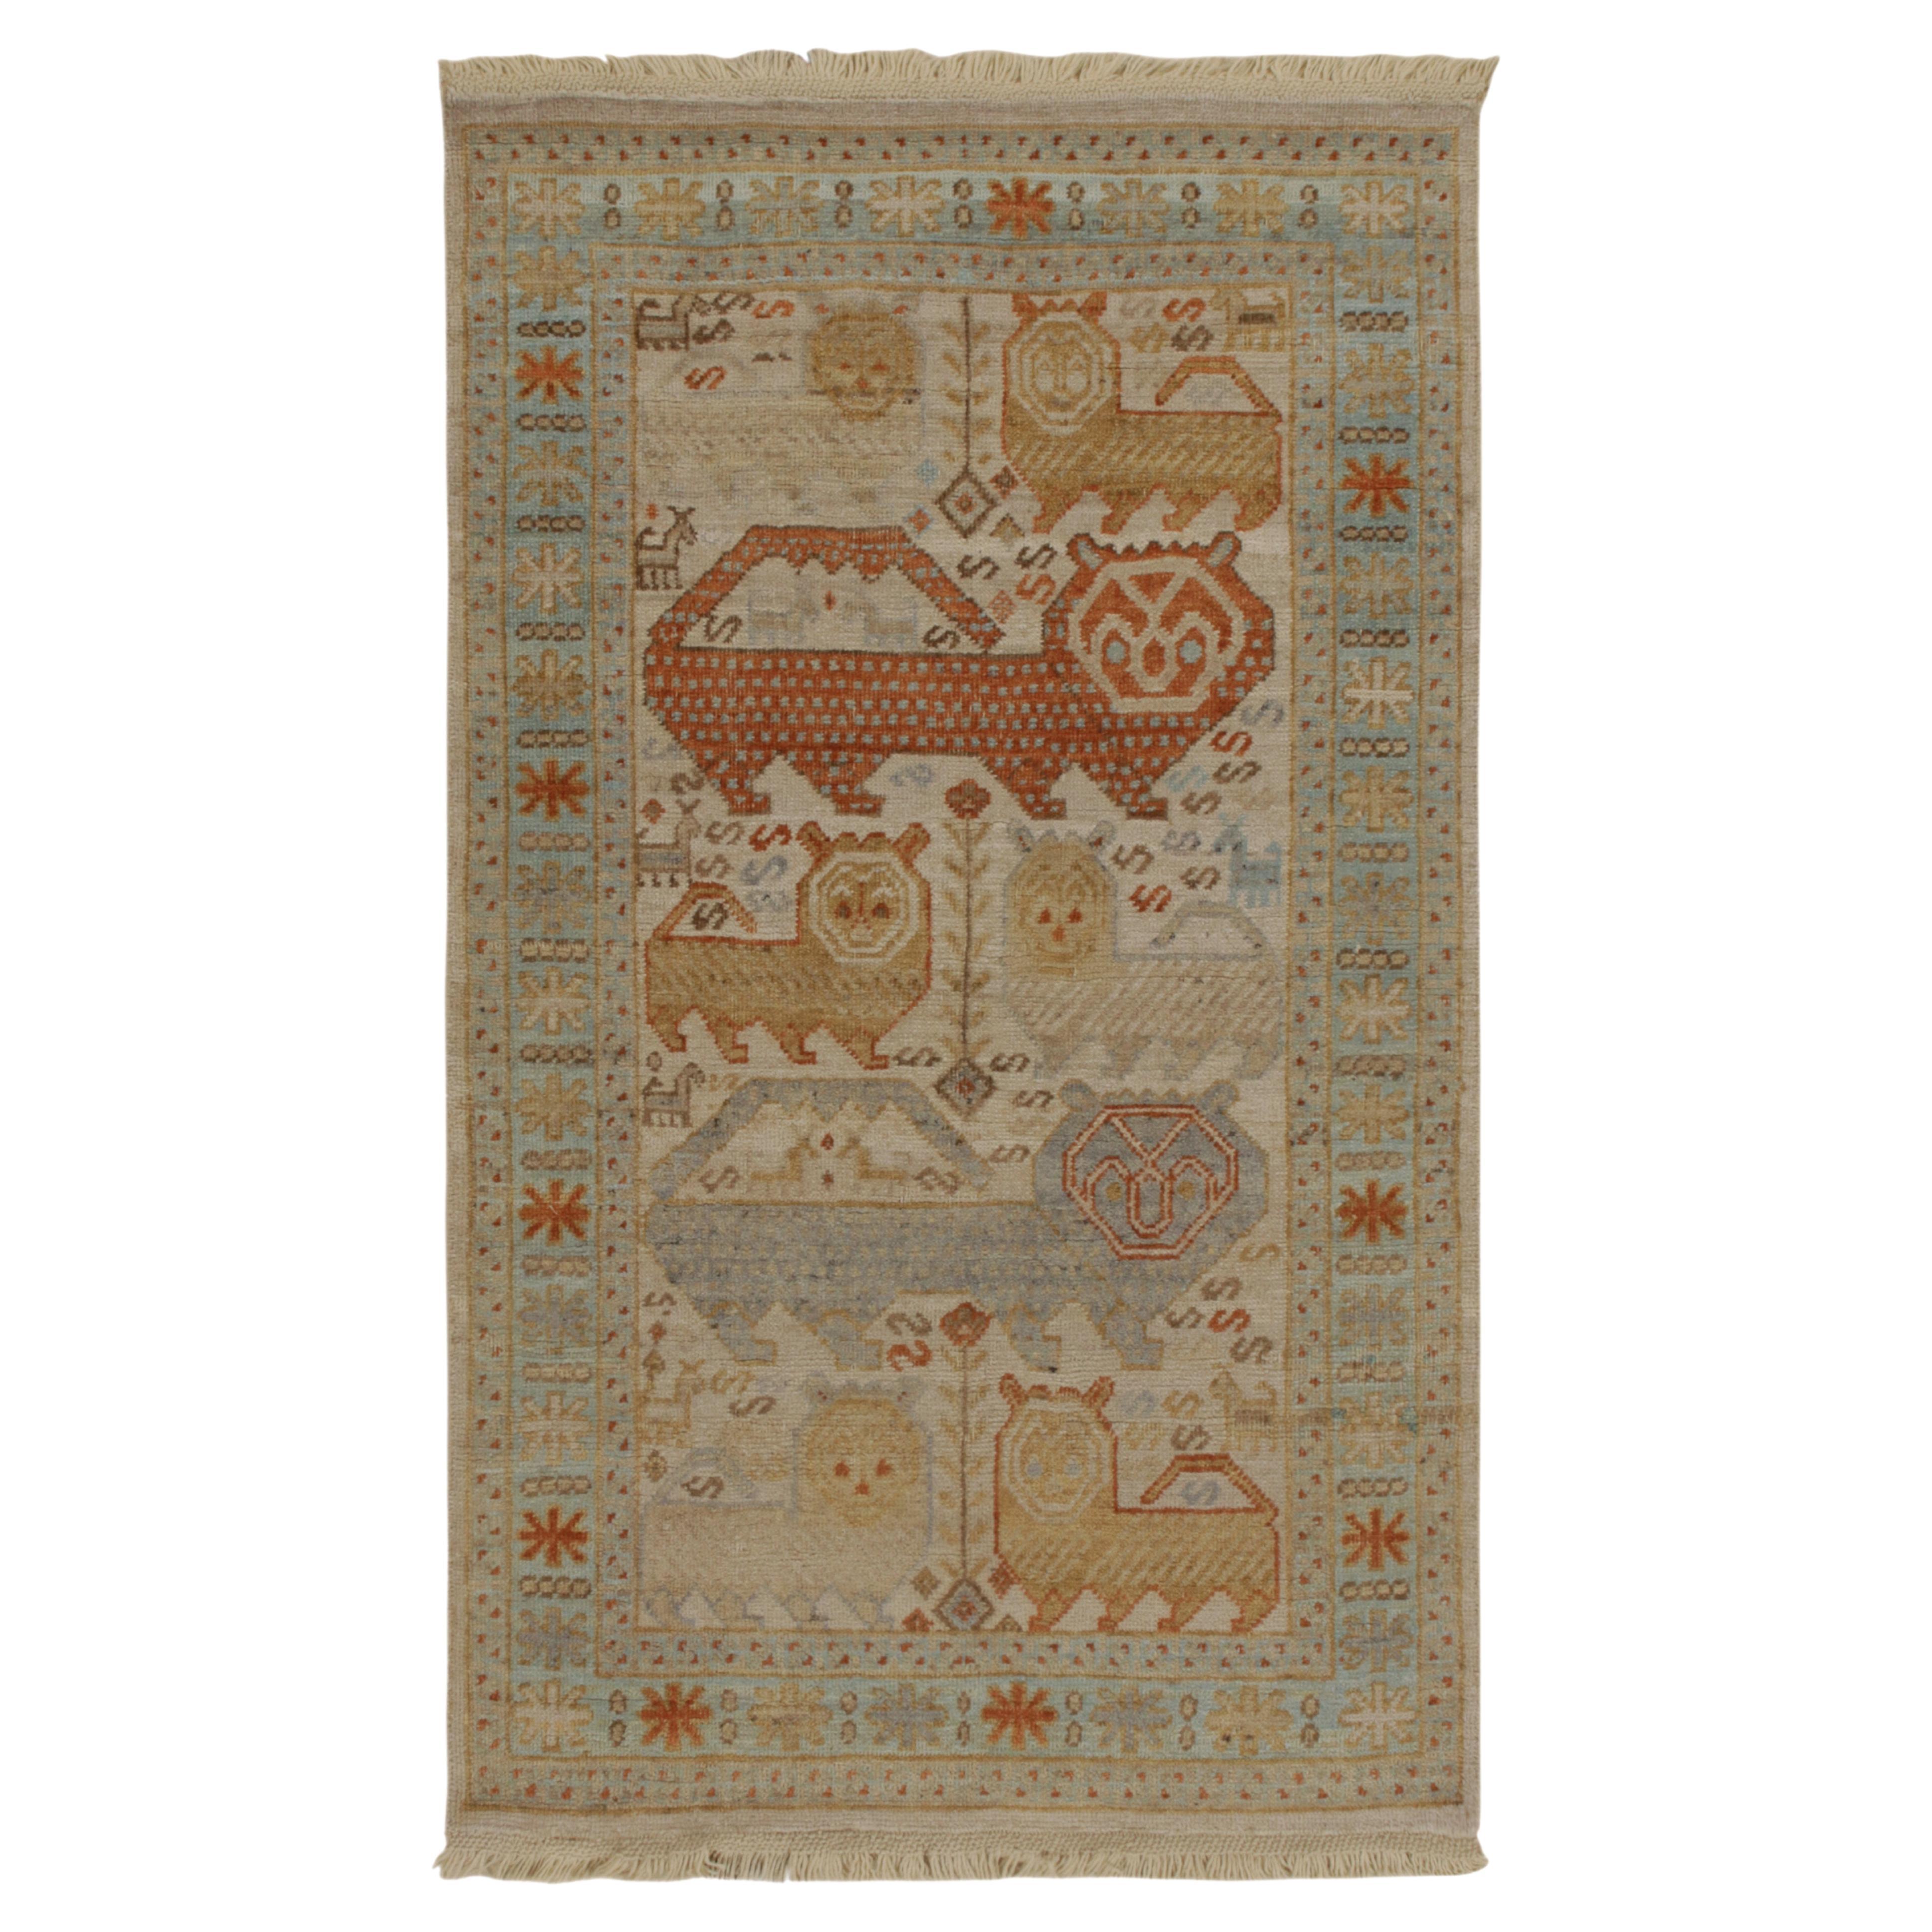 Rug & Kilim’s Tribal Style Runner in Beige-Brown, Blue and Red Pictorials For Sale